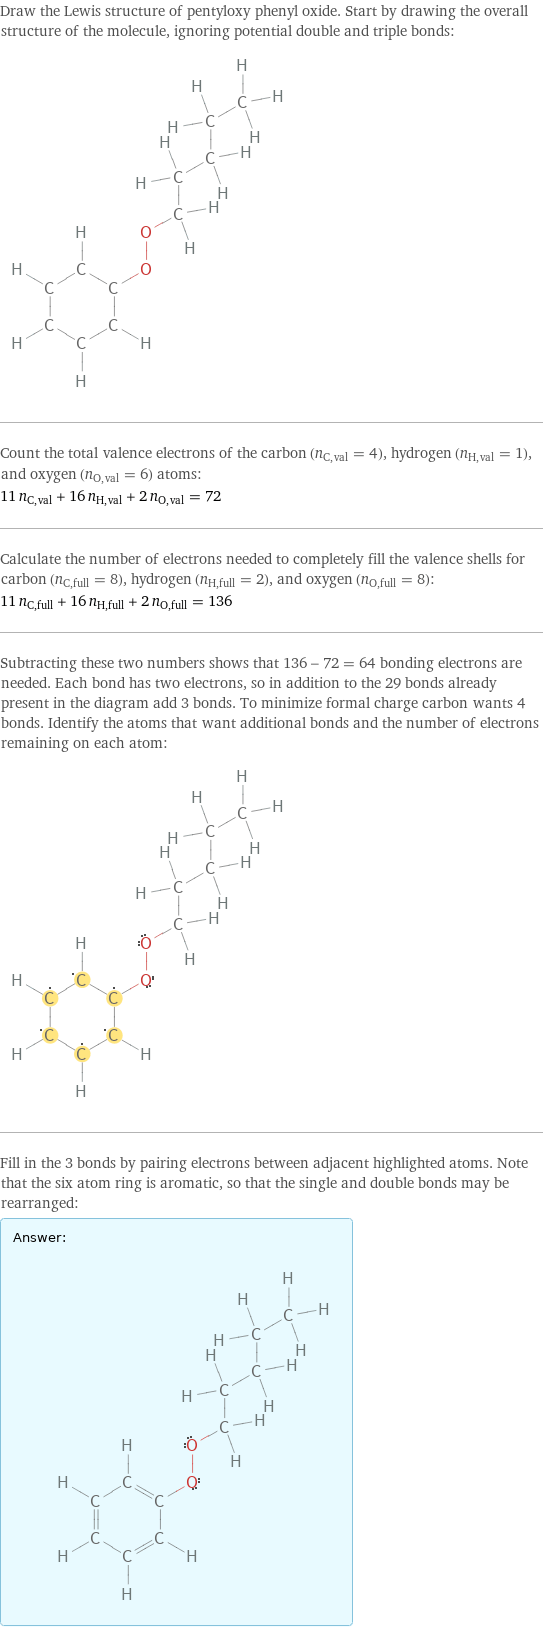 Draw the Lewis structure of pentyloxy phenyl oxide. Start by drawing the overall structure of the molecule, ignoring potential double and triple bonds:  Count the total valence electrons of the carbon (n_C, val = 4), hydrogen (n_H, val = 1), and oxygen (n_O, val = 6) atoms: 11 n_C, val + 16 n_H, val + 2 n_O, val = 72 Calculate the number of electrons needed to completely fill the valence shells for carbon (n_C, full = 8), hydrogen (n_H, full = 2), and oxygen (n_O, full = 8): 11 n_C, full + 16 n_H, full + 2 n_O, full = 136 Subtracting these two numbers shows that 136 - 72 = 64 bonding electrons are needed. Each bond has two electrons, so in addition to the 29 bonds already present in the diagram add 3 bonds. To minimize formal charge carbon wants 4 bonds. Identify the atoms that want additional bonds and the number of electrons remaining on each atom:  Fill in the 3 bonds by pairing electrons between adjacent highlighted atoms. Note that the six atom ring is aromatic, so that the single and double bonds may be rearranged: Answer: |   | 